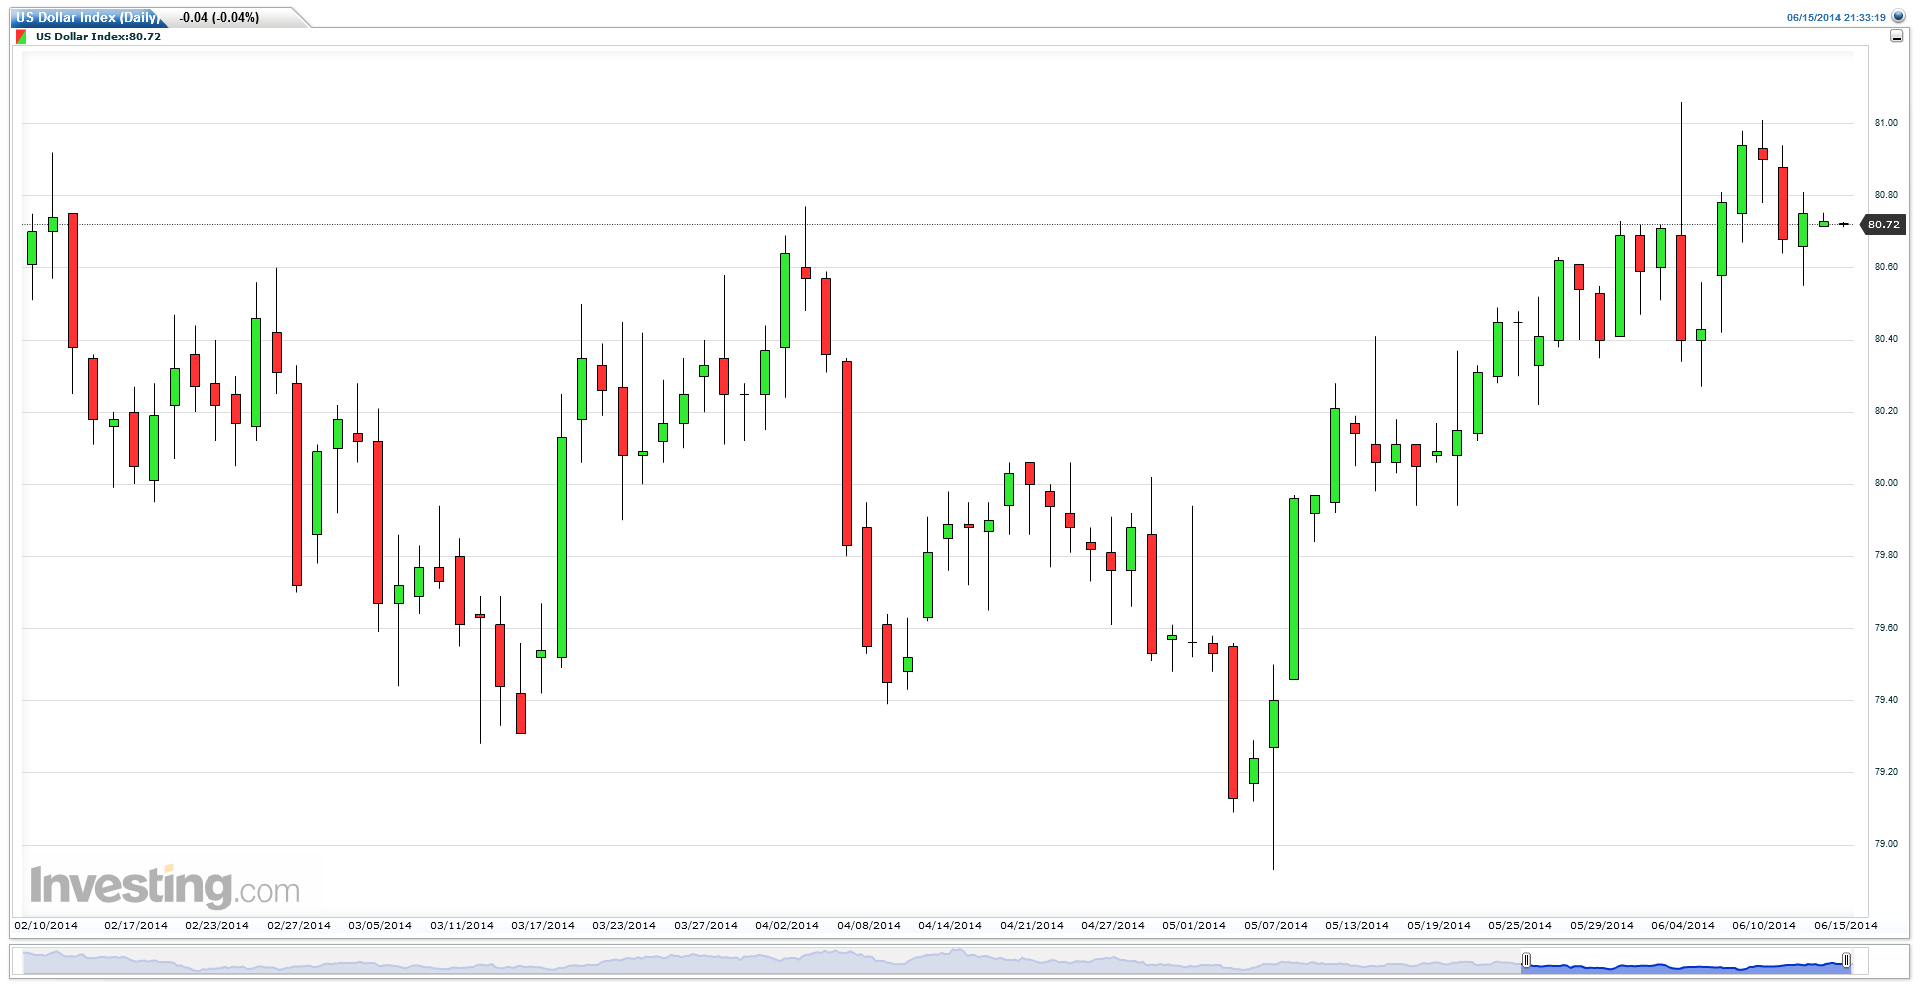 US Dollar Index (Daily), June 15, 2014 - Option Queen Letter